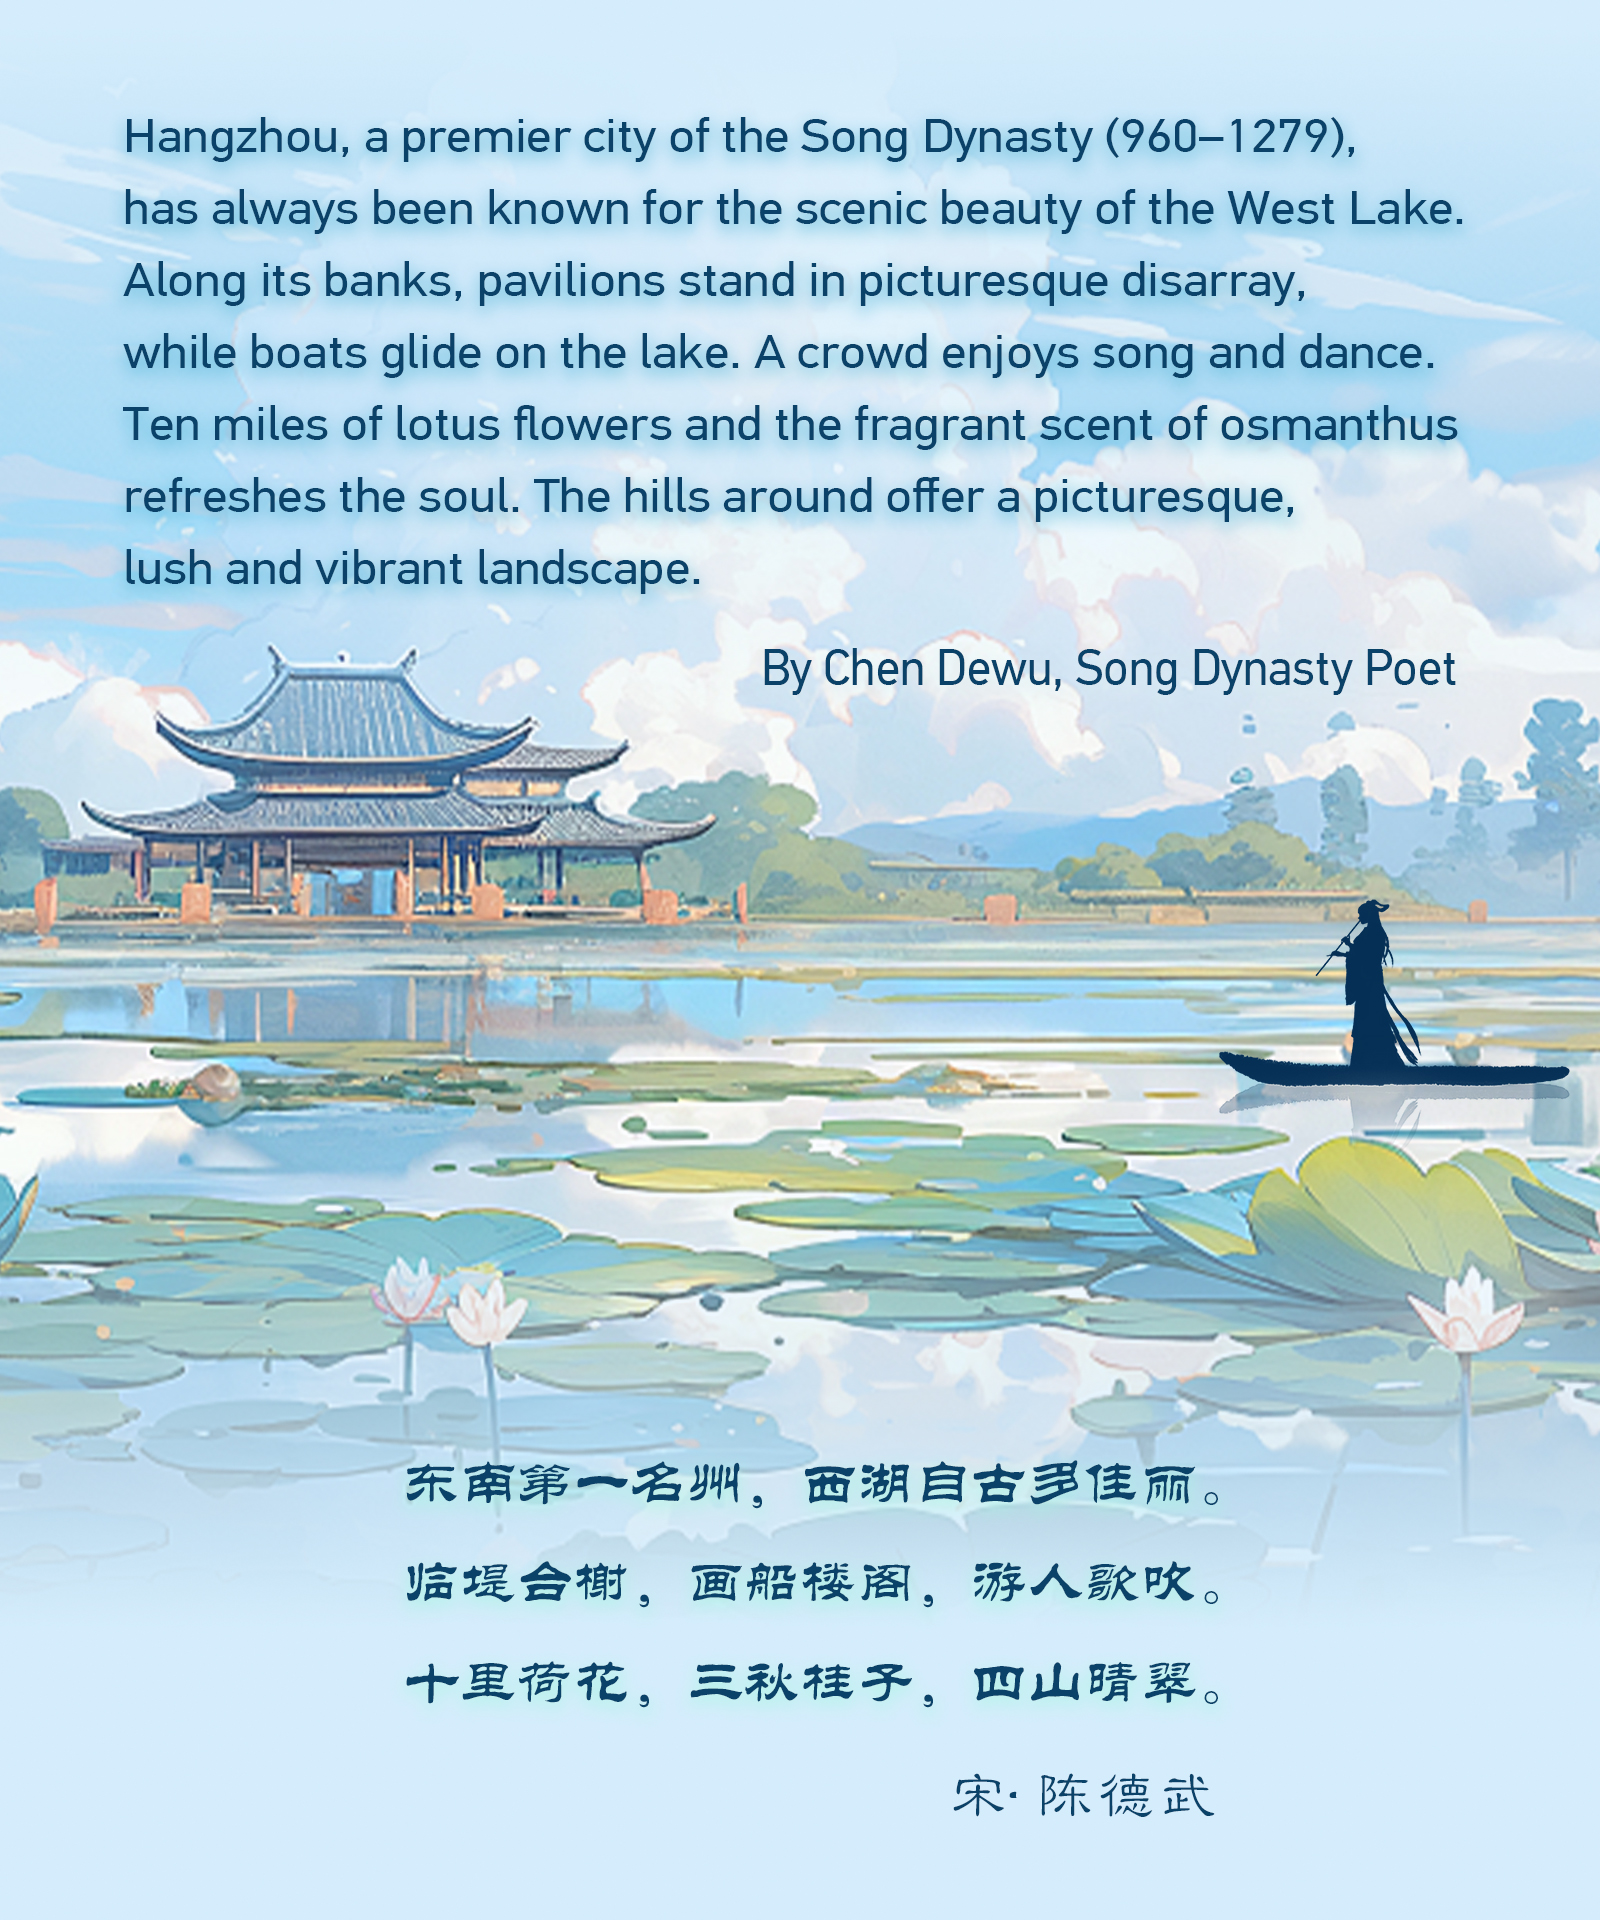 Chen Dewu's West Lake: A poetic elegy for heroes and hope